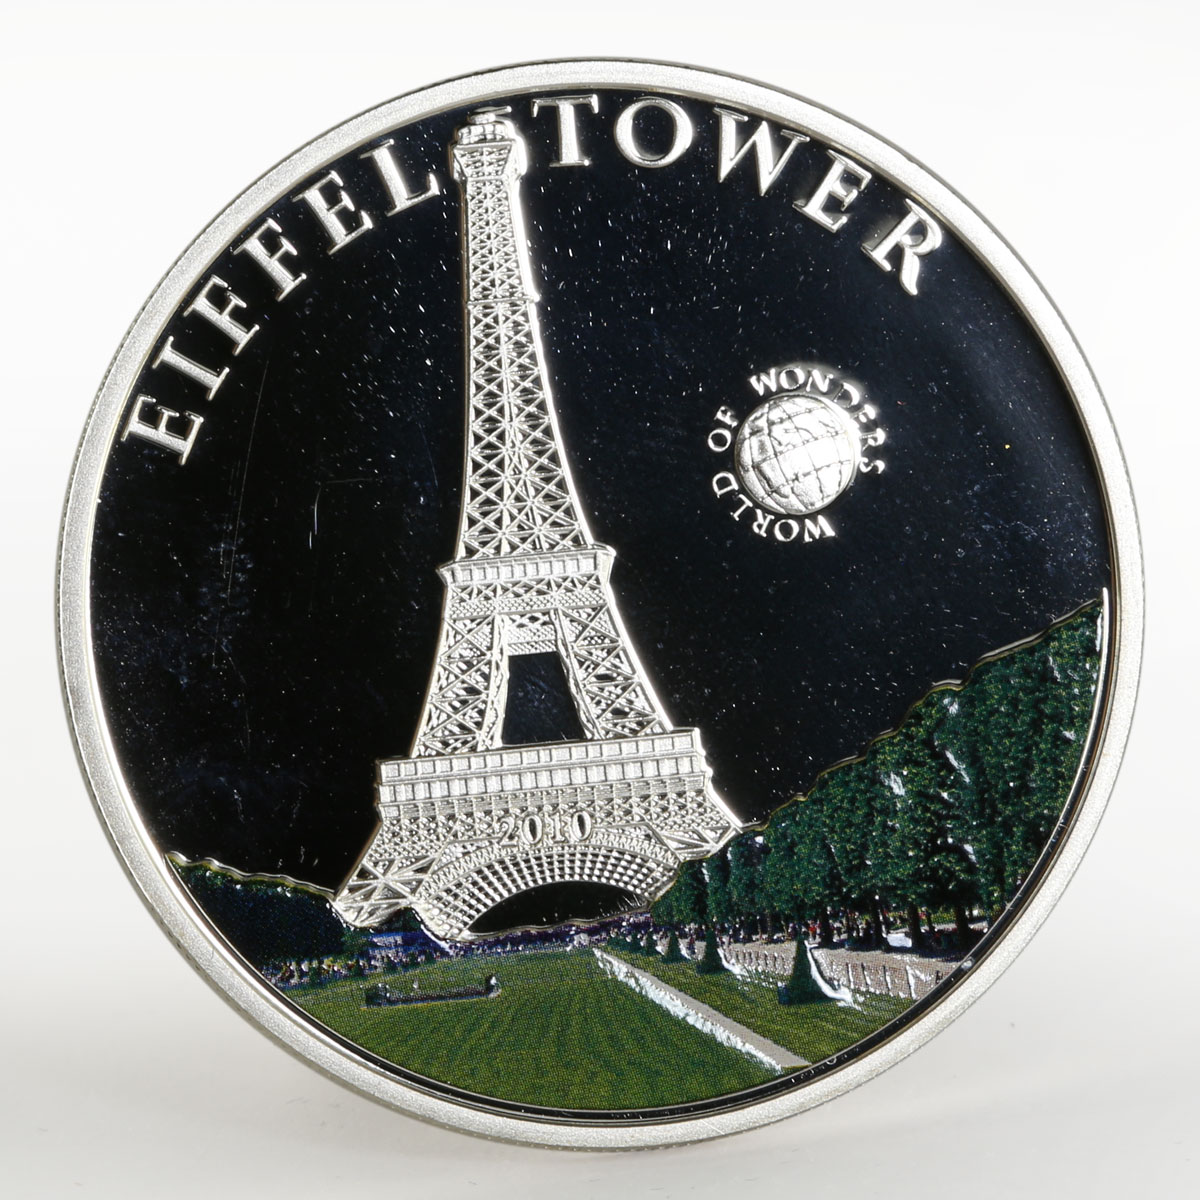 Palau 5 dollars World of Wonders Eiffeltower colored proof silver coin 2010